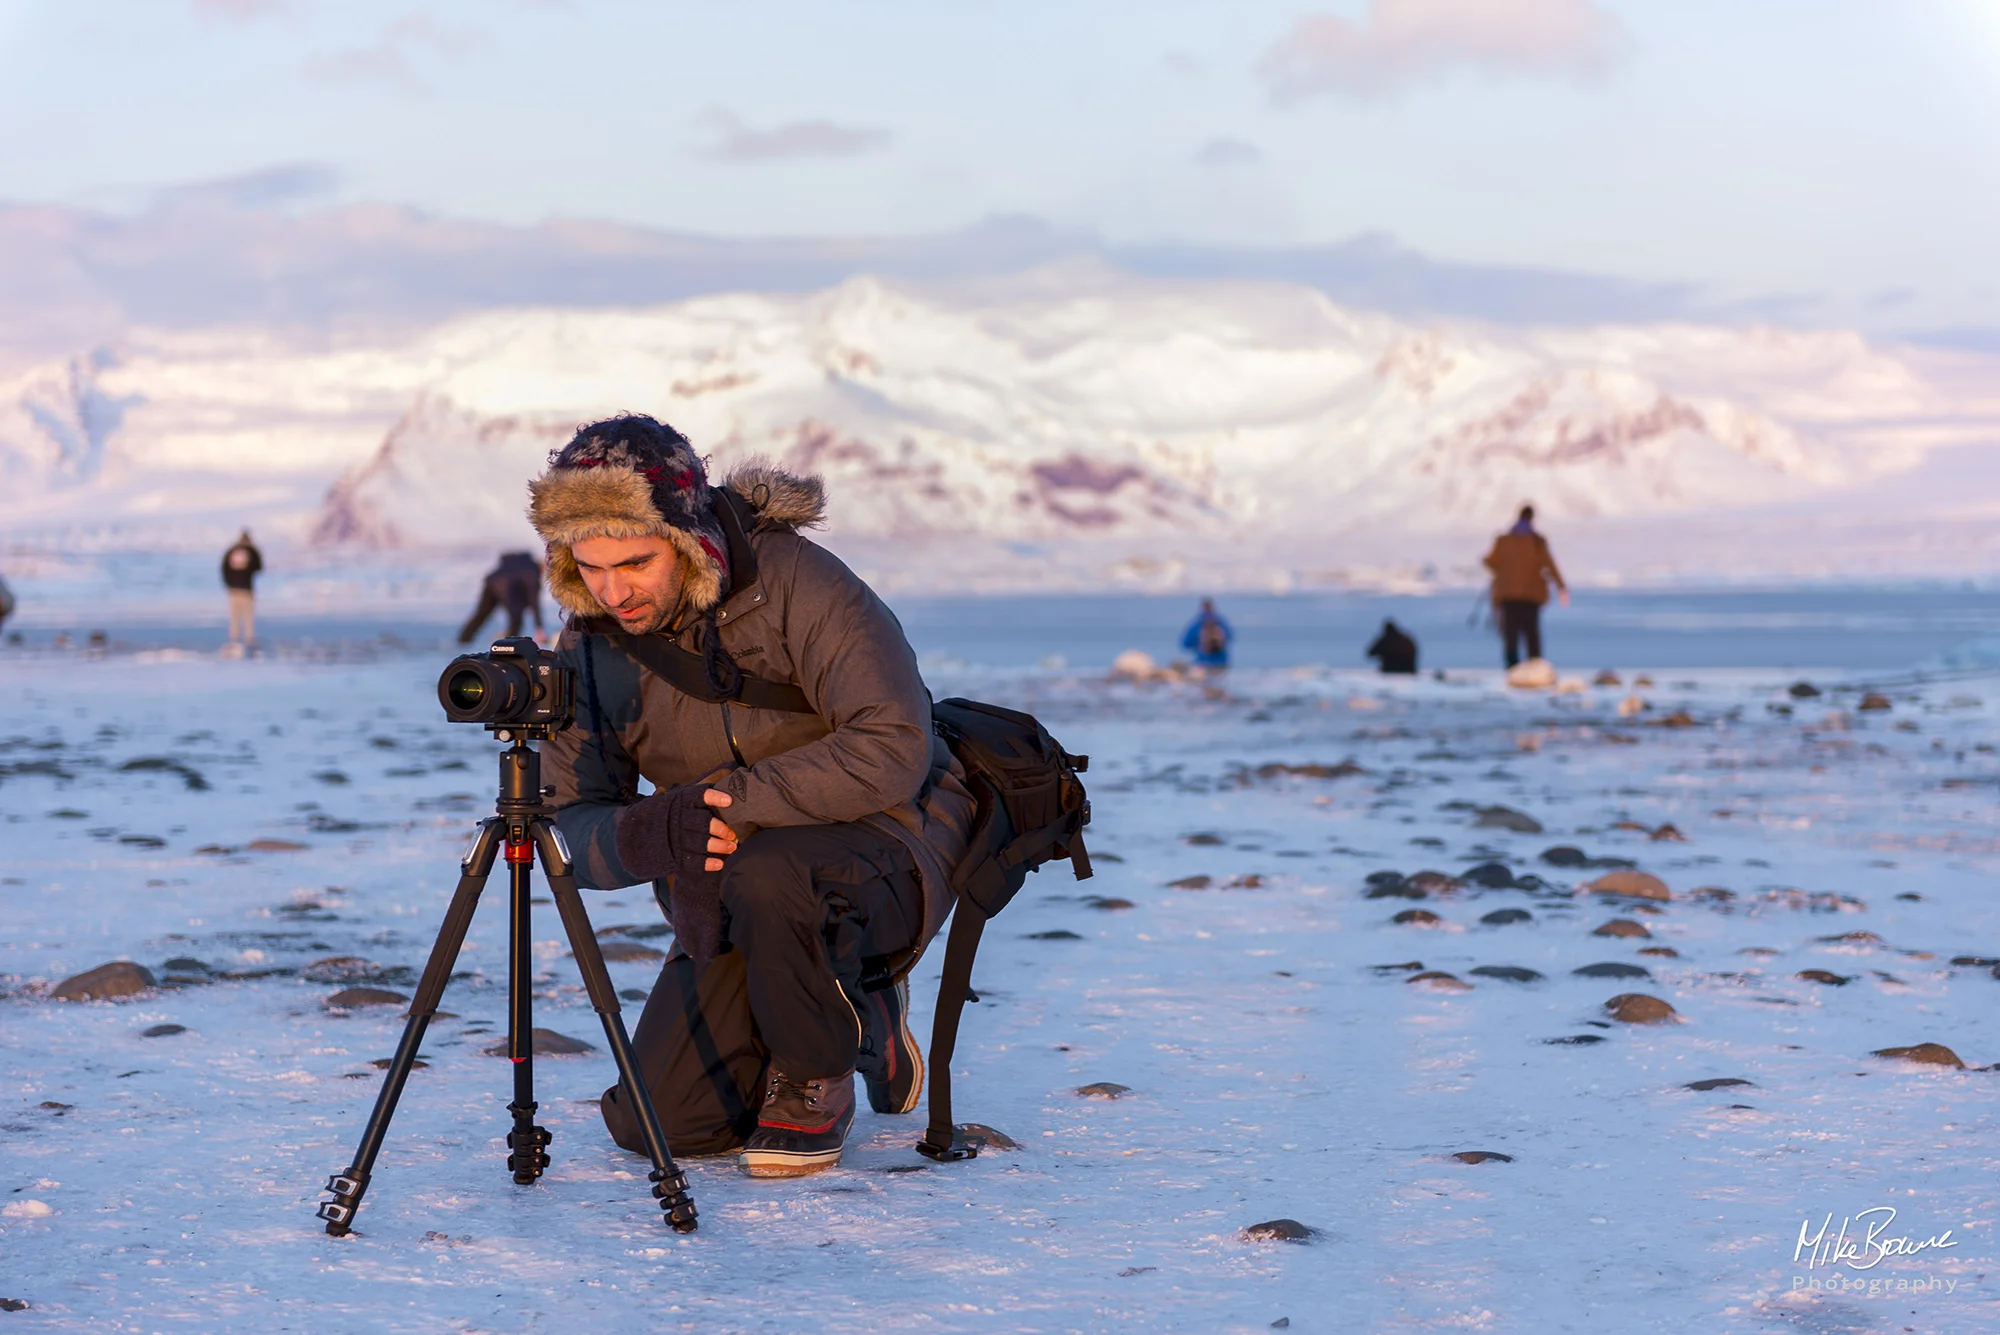 Photographer crouching by camera and tripod with snow covered mountains behind